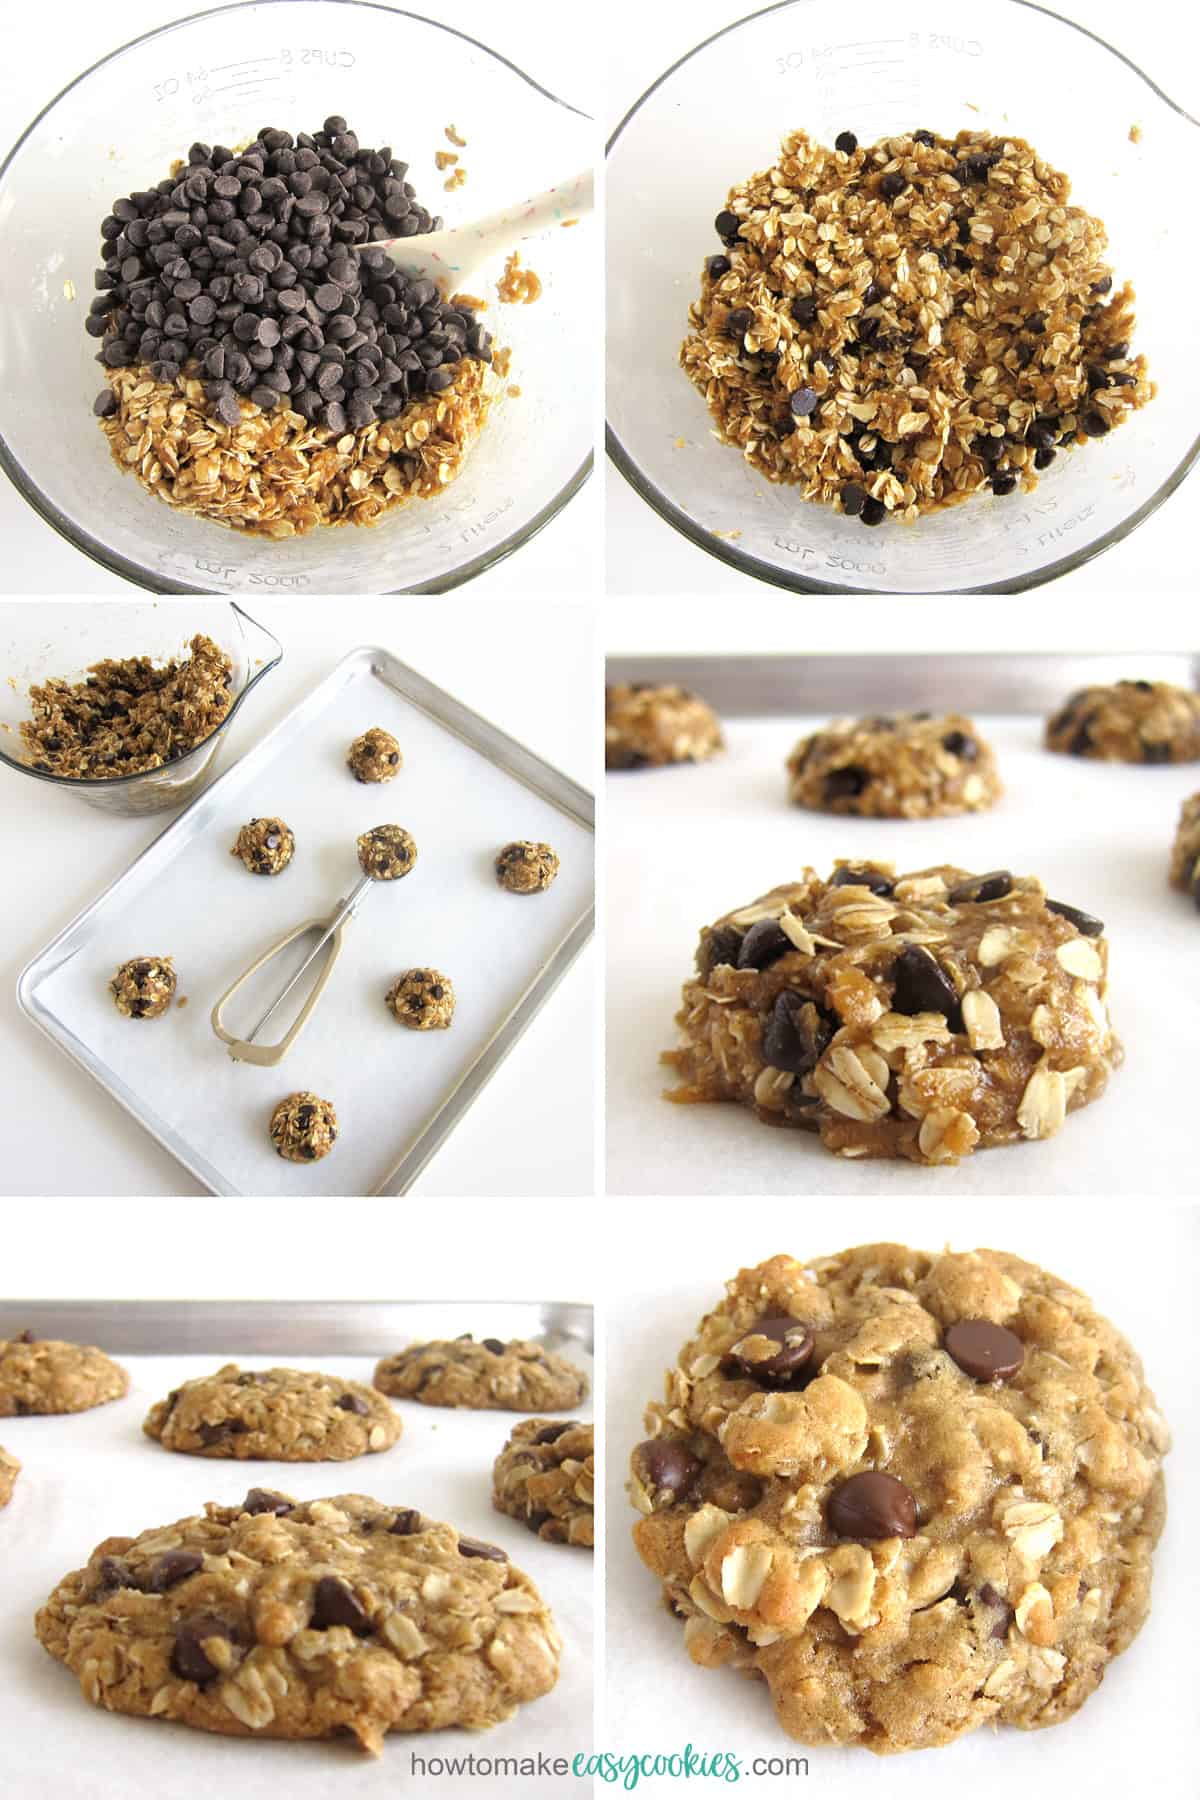 mix chocolate chips into oatmeal cookie dough, then scoop balls onto cookie sheet, flatten, and bake